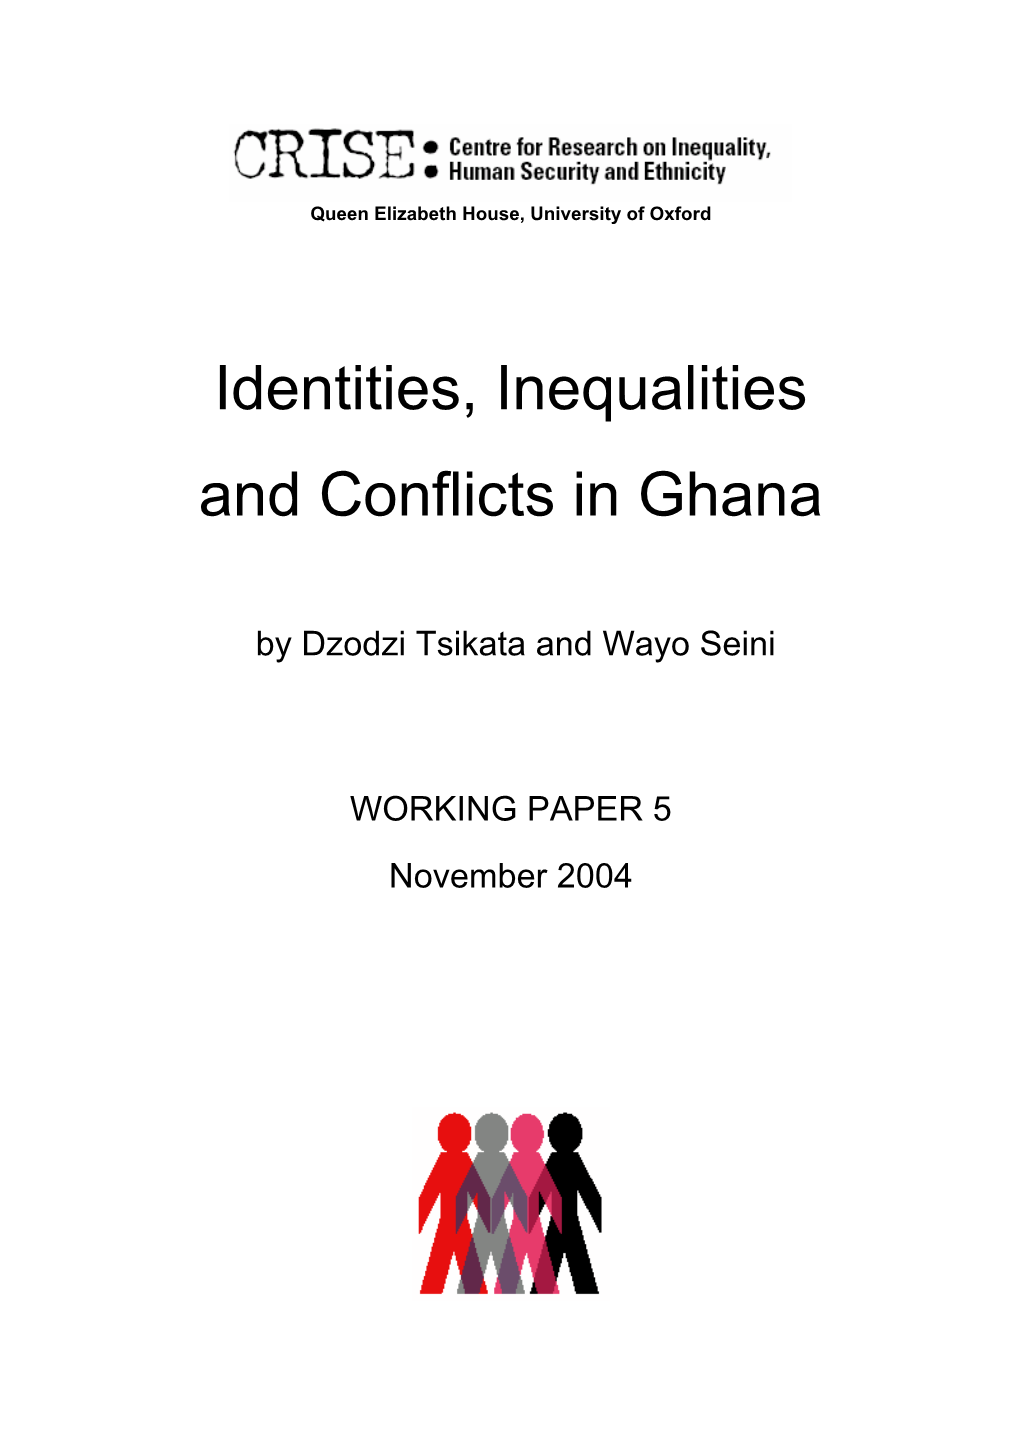 Inequalities, Conflicts and Identities in Ghana